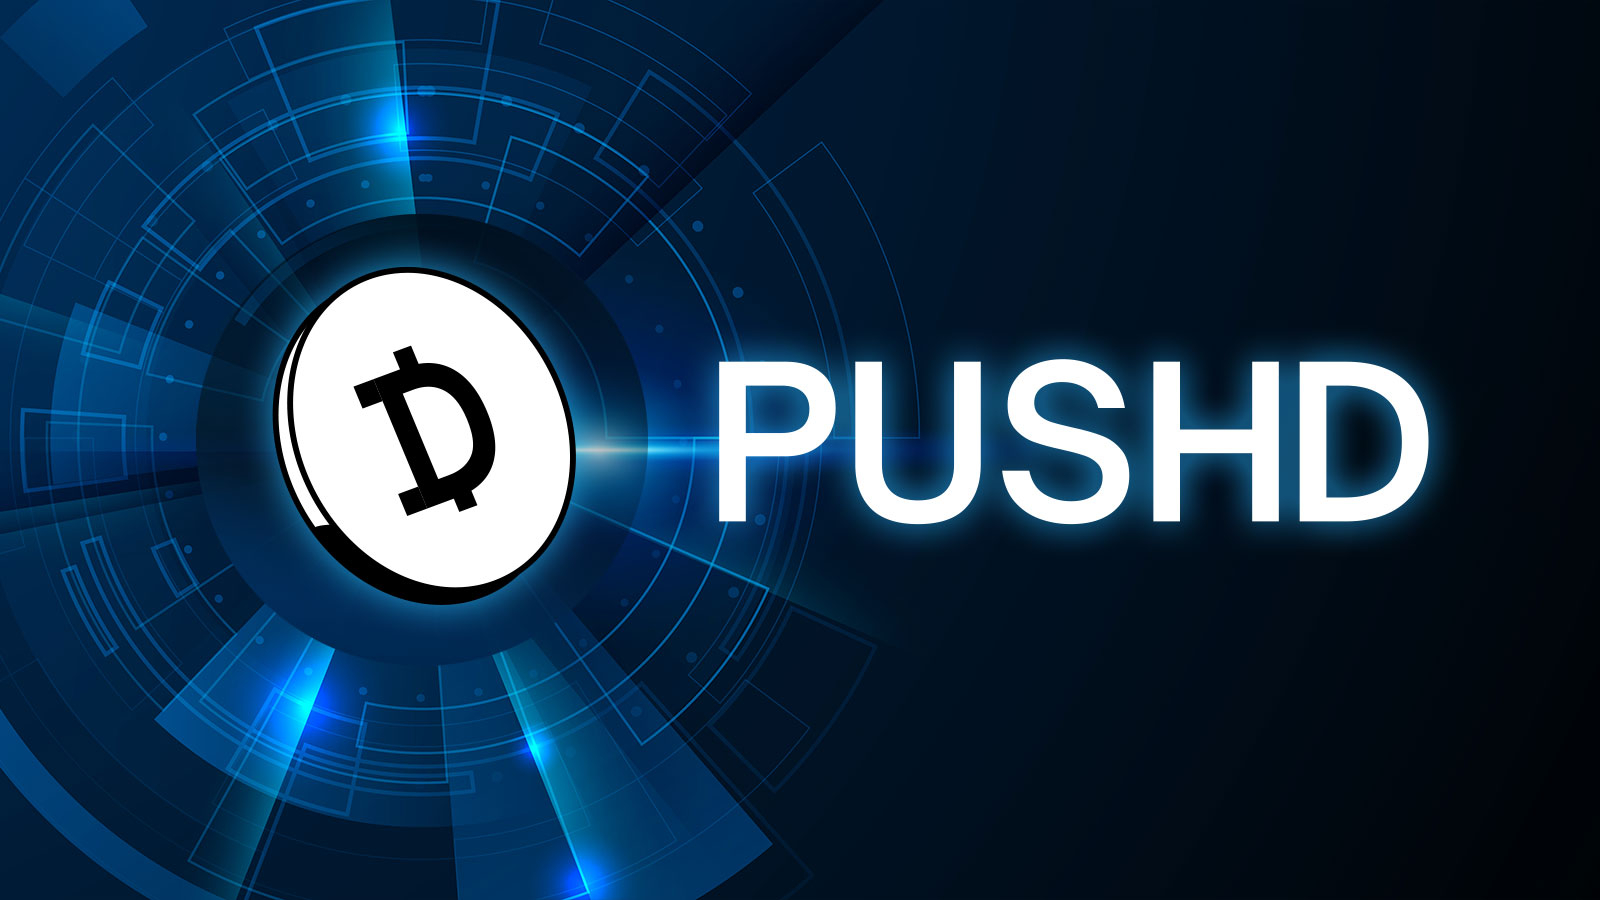 Pushd (PUSHD) Fresh Pre-Sale Stage Spotlighted by Altcoiners as Bitcoin Cash (BCH), Monero (XMR) Communities Optimistic About Their Bags